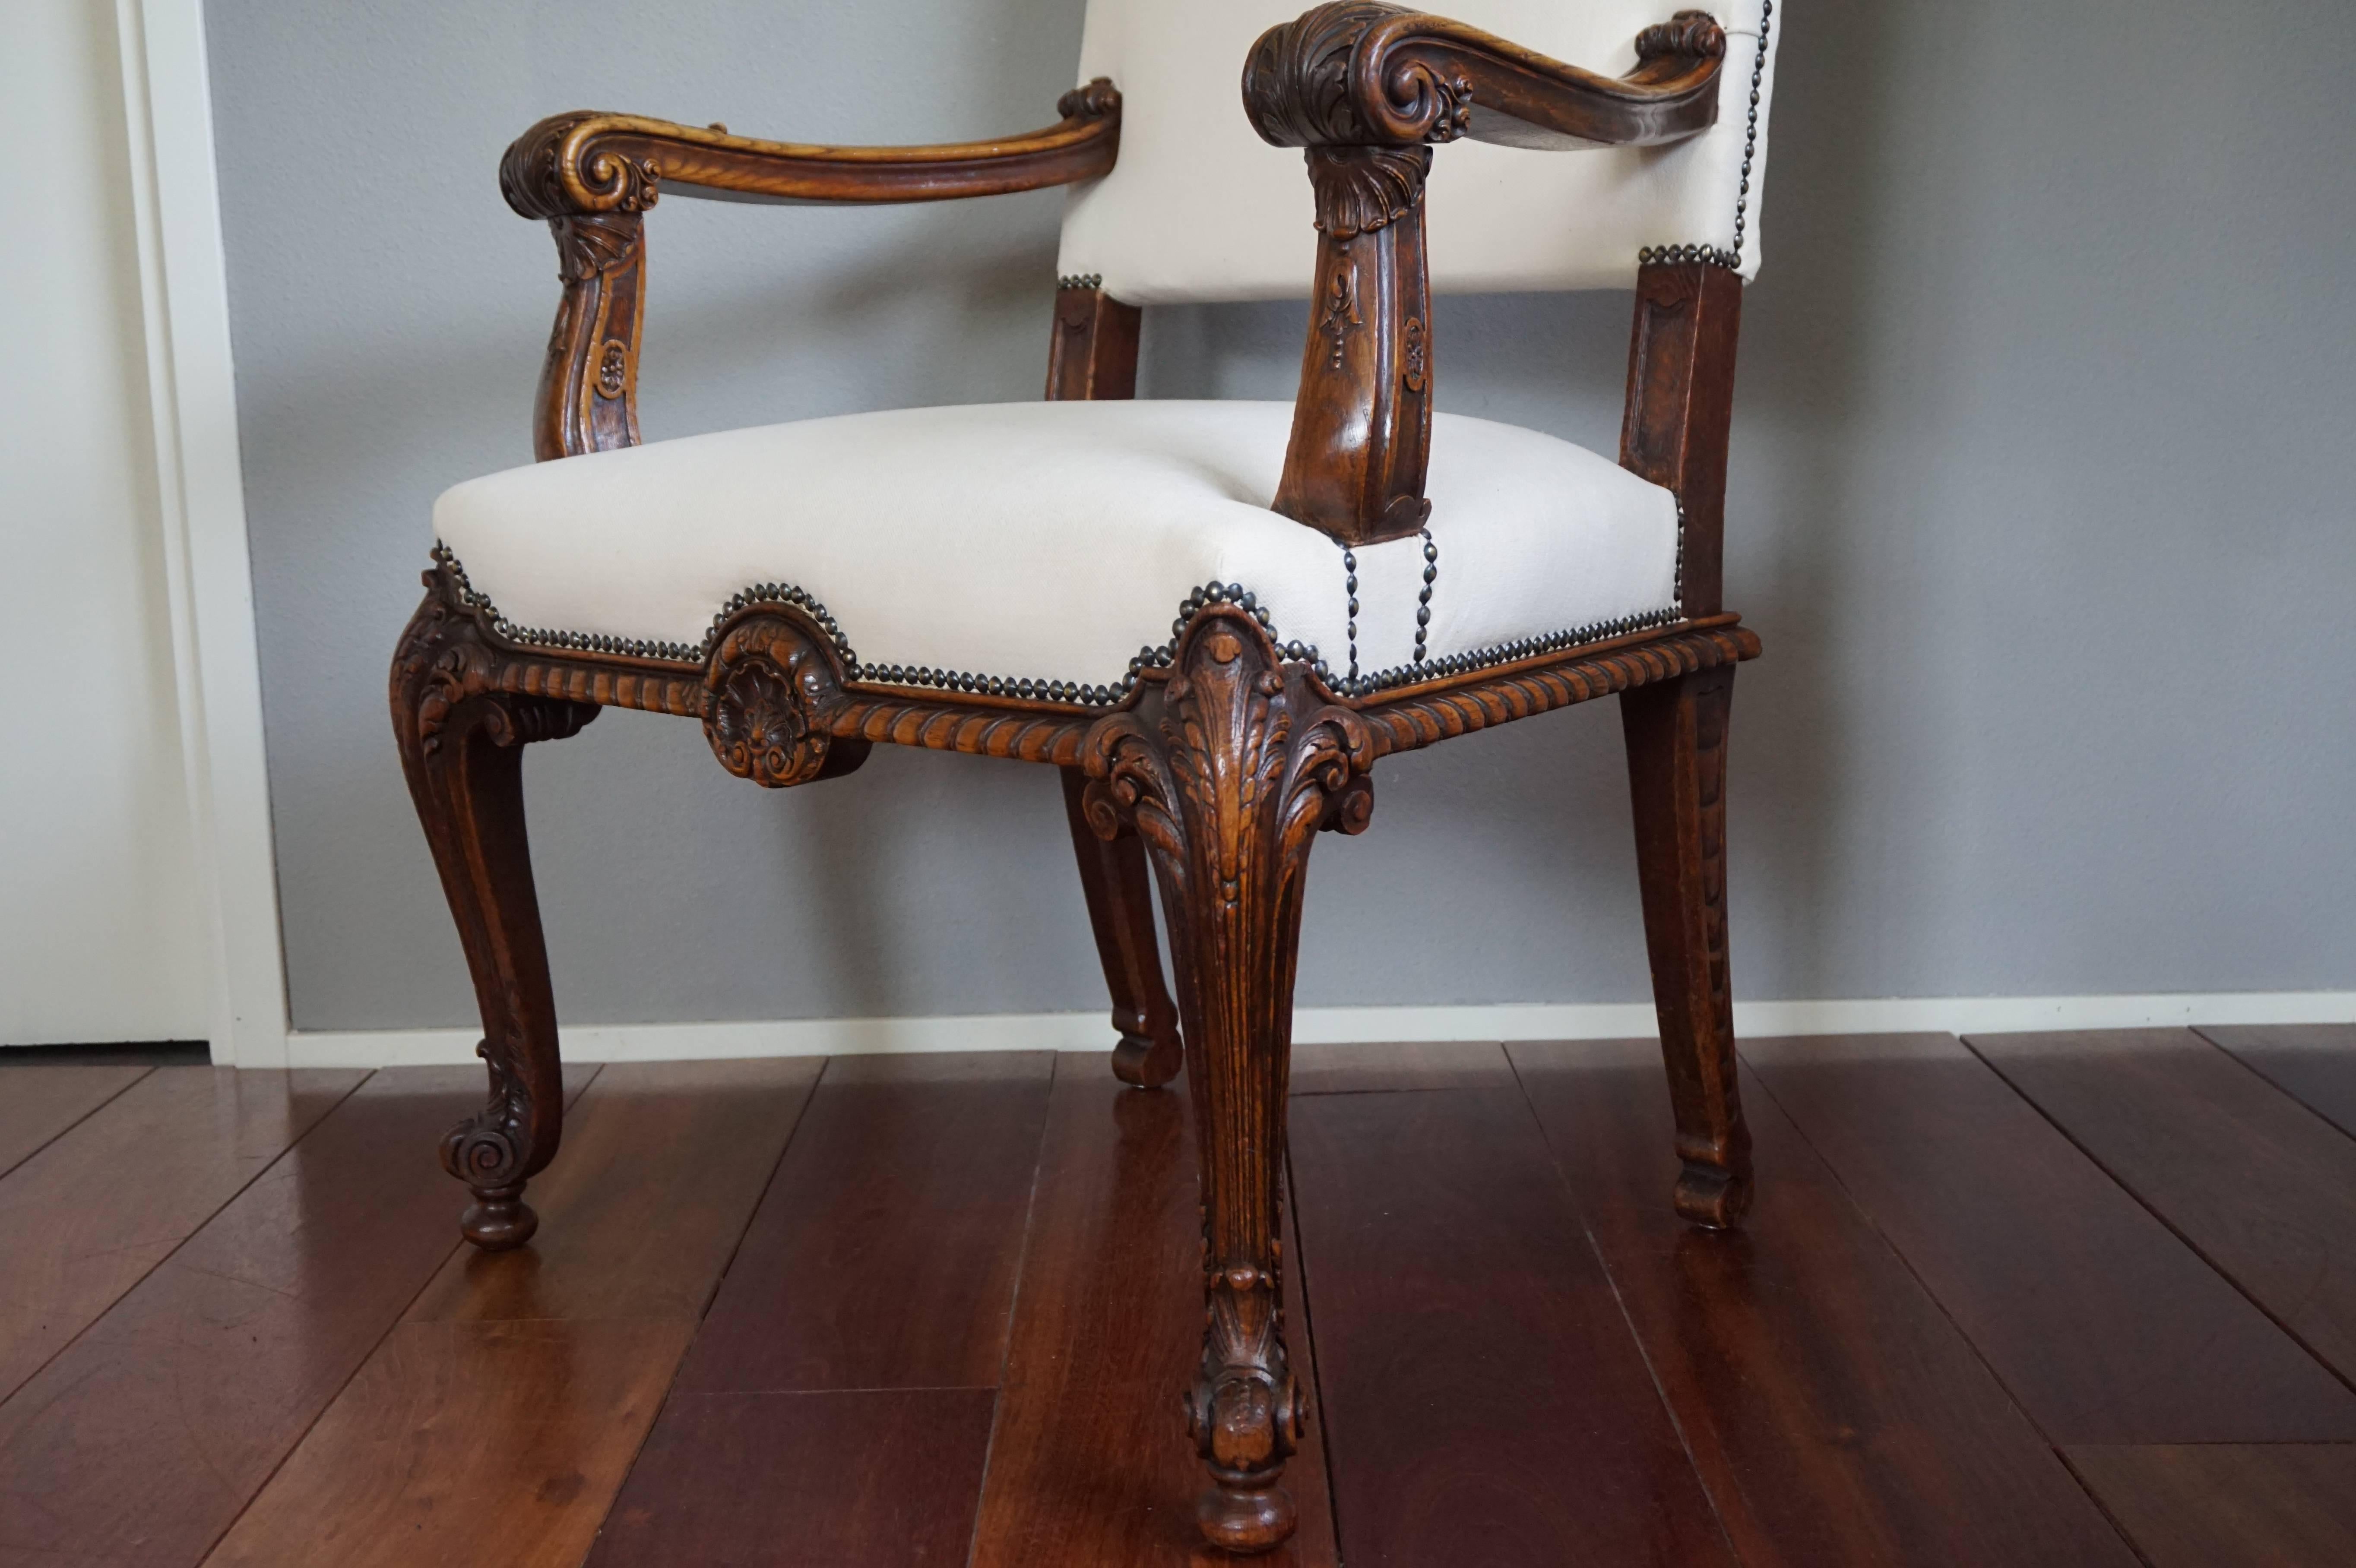 Large and stately chair with some of the best quality carvings we ever seen.

This large armchair from the 1800s is as strong and stable as the day it was handcrafted. The two things that immediately catch your eye and what makes it stand out from